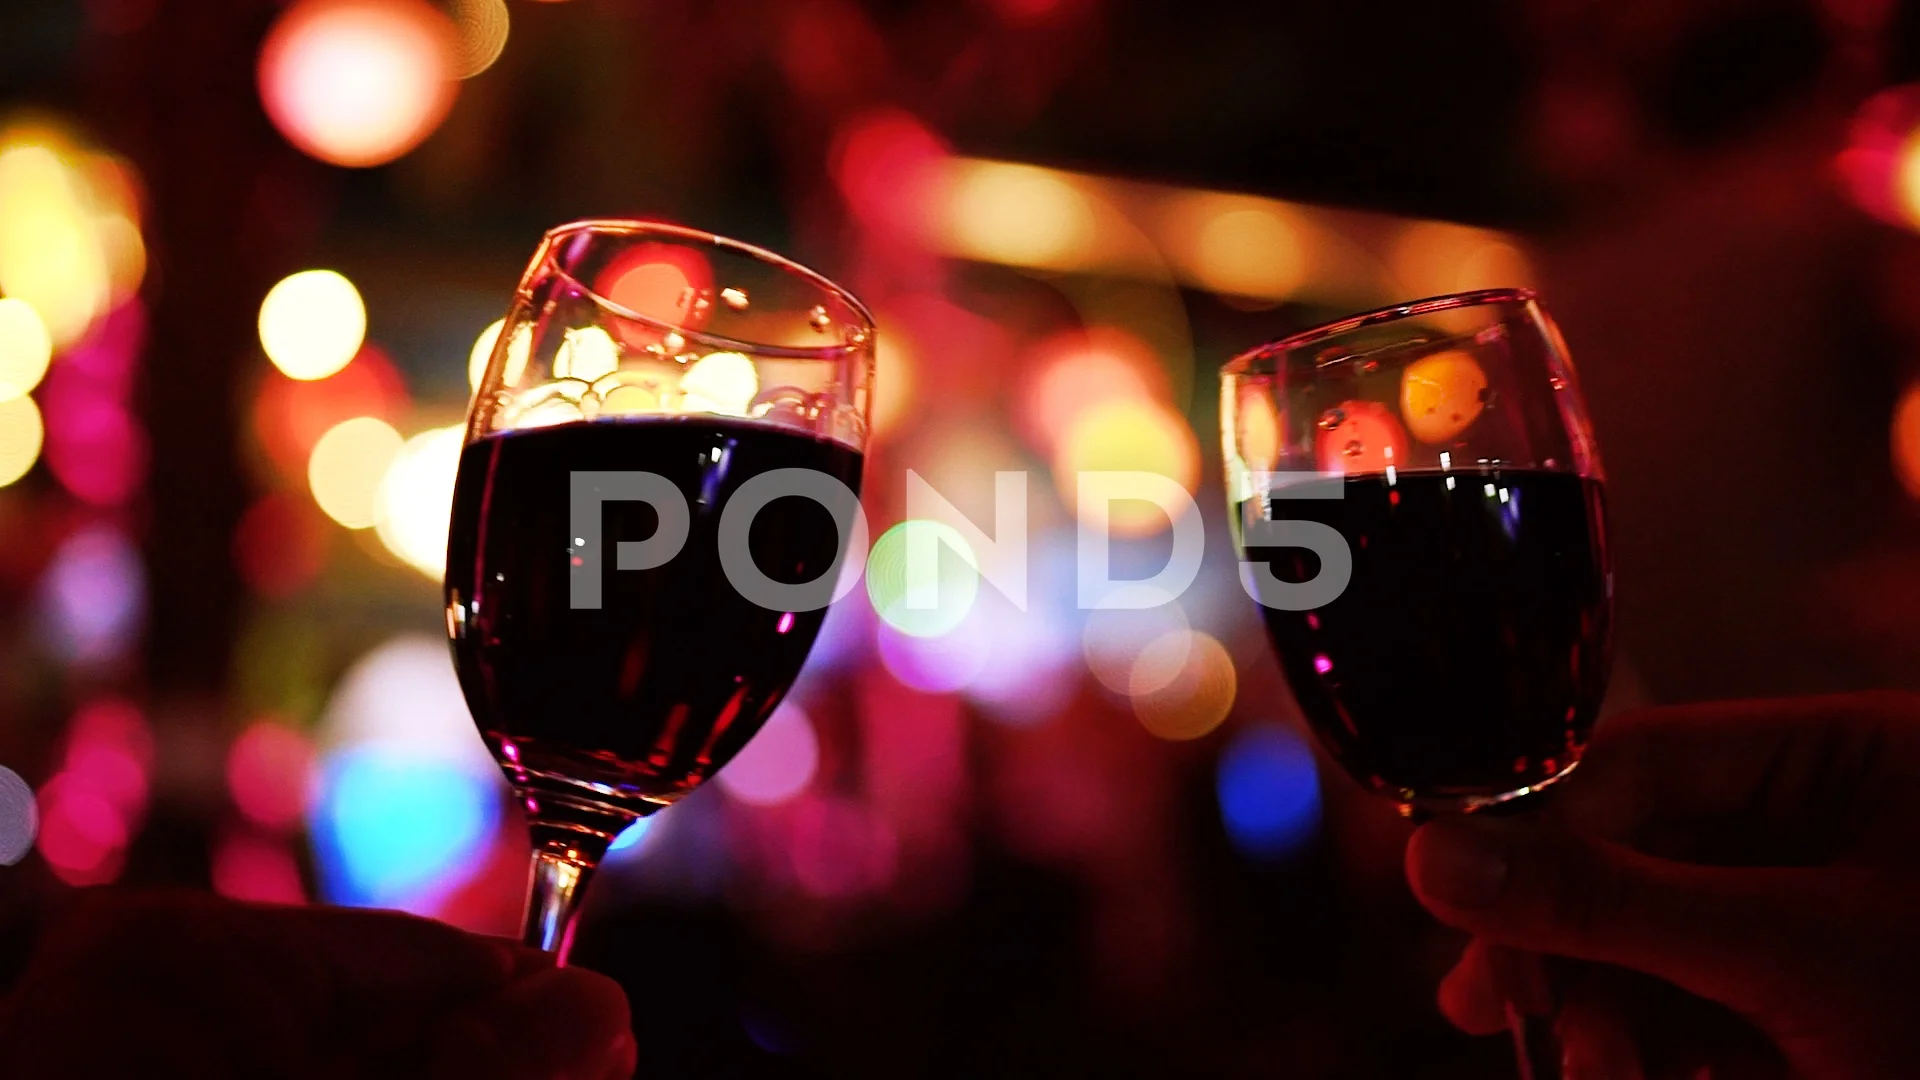 https://images.pond5.com/two-people-cheers-or-toast-071371166_prevstill.jpeg